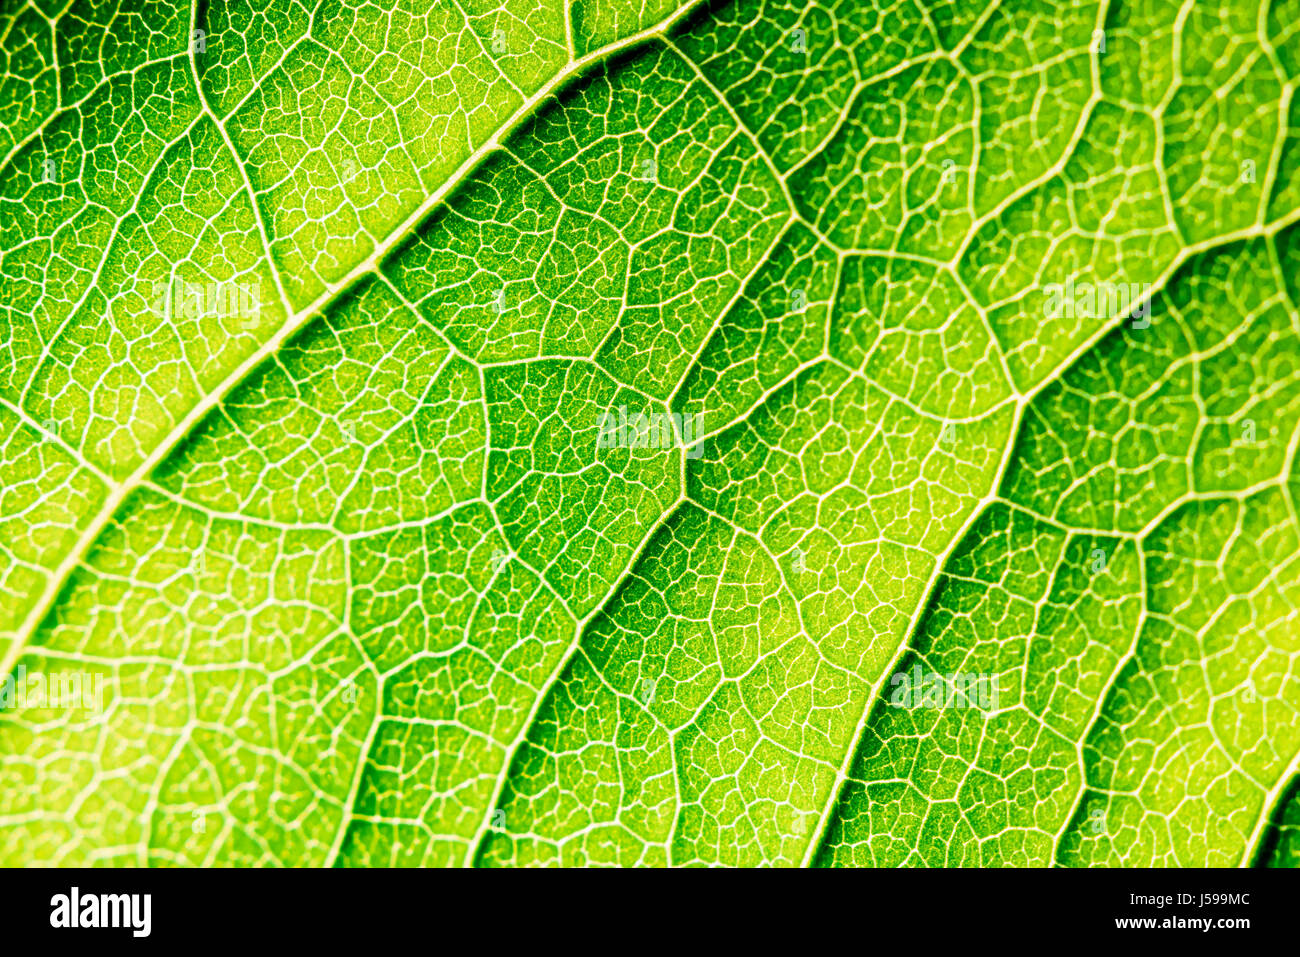 Green Leaf Texture With Visible Stomata Covering The Outer Epidermis Layer Stock Photo